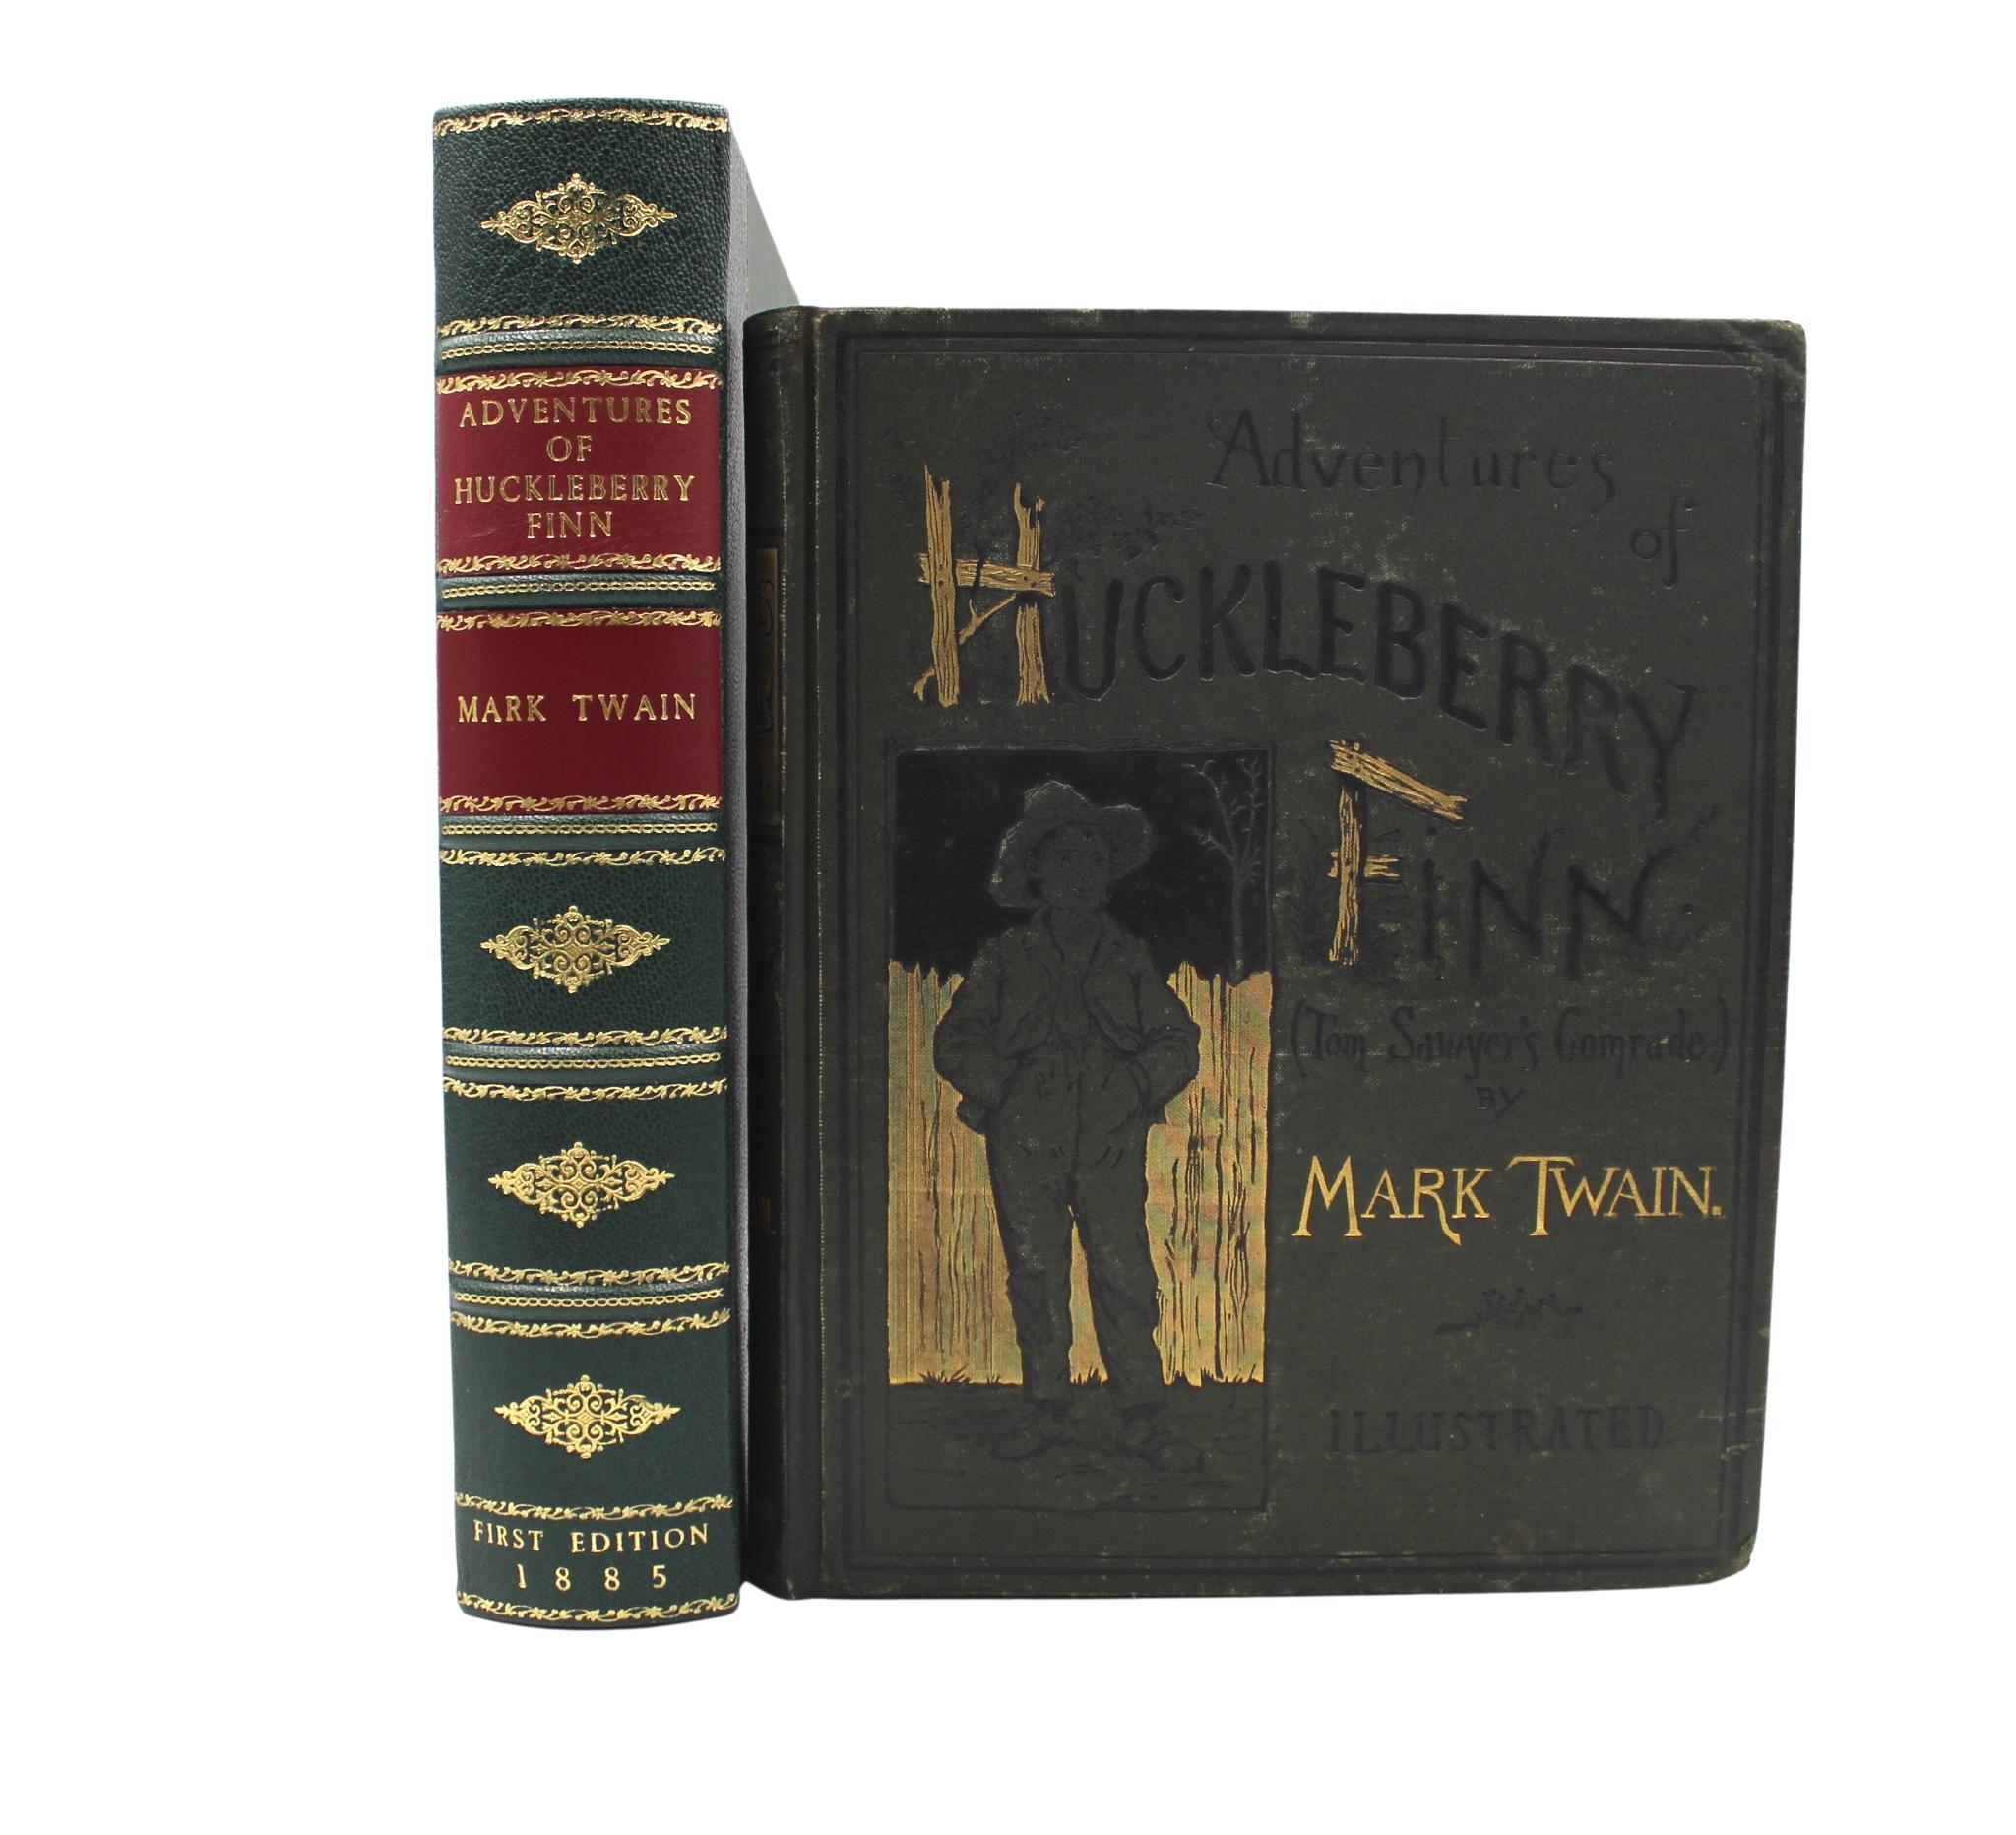 Late 19th Century Adventures of Huckleberry Finn by Mark Twain, First American Edition, 1885